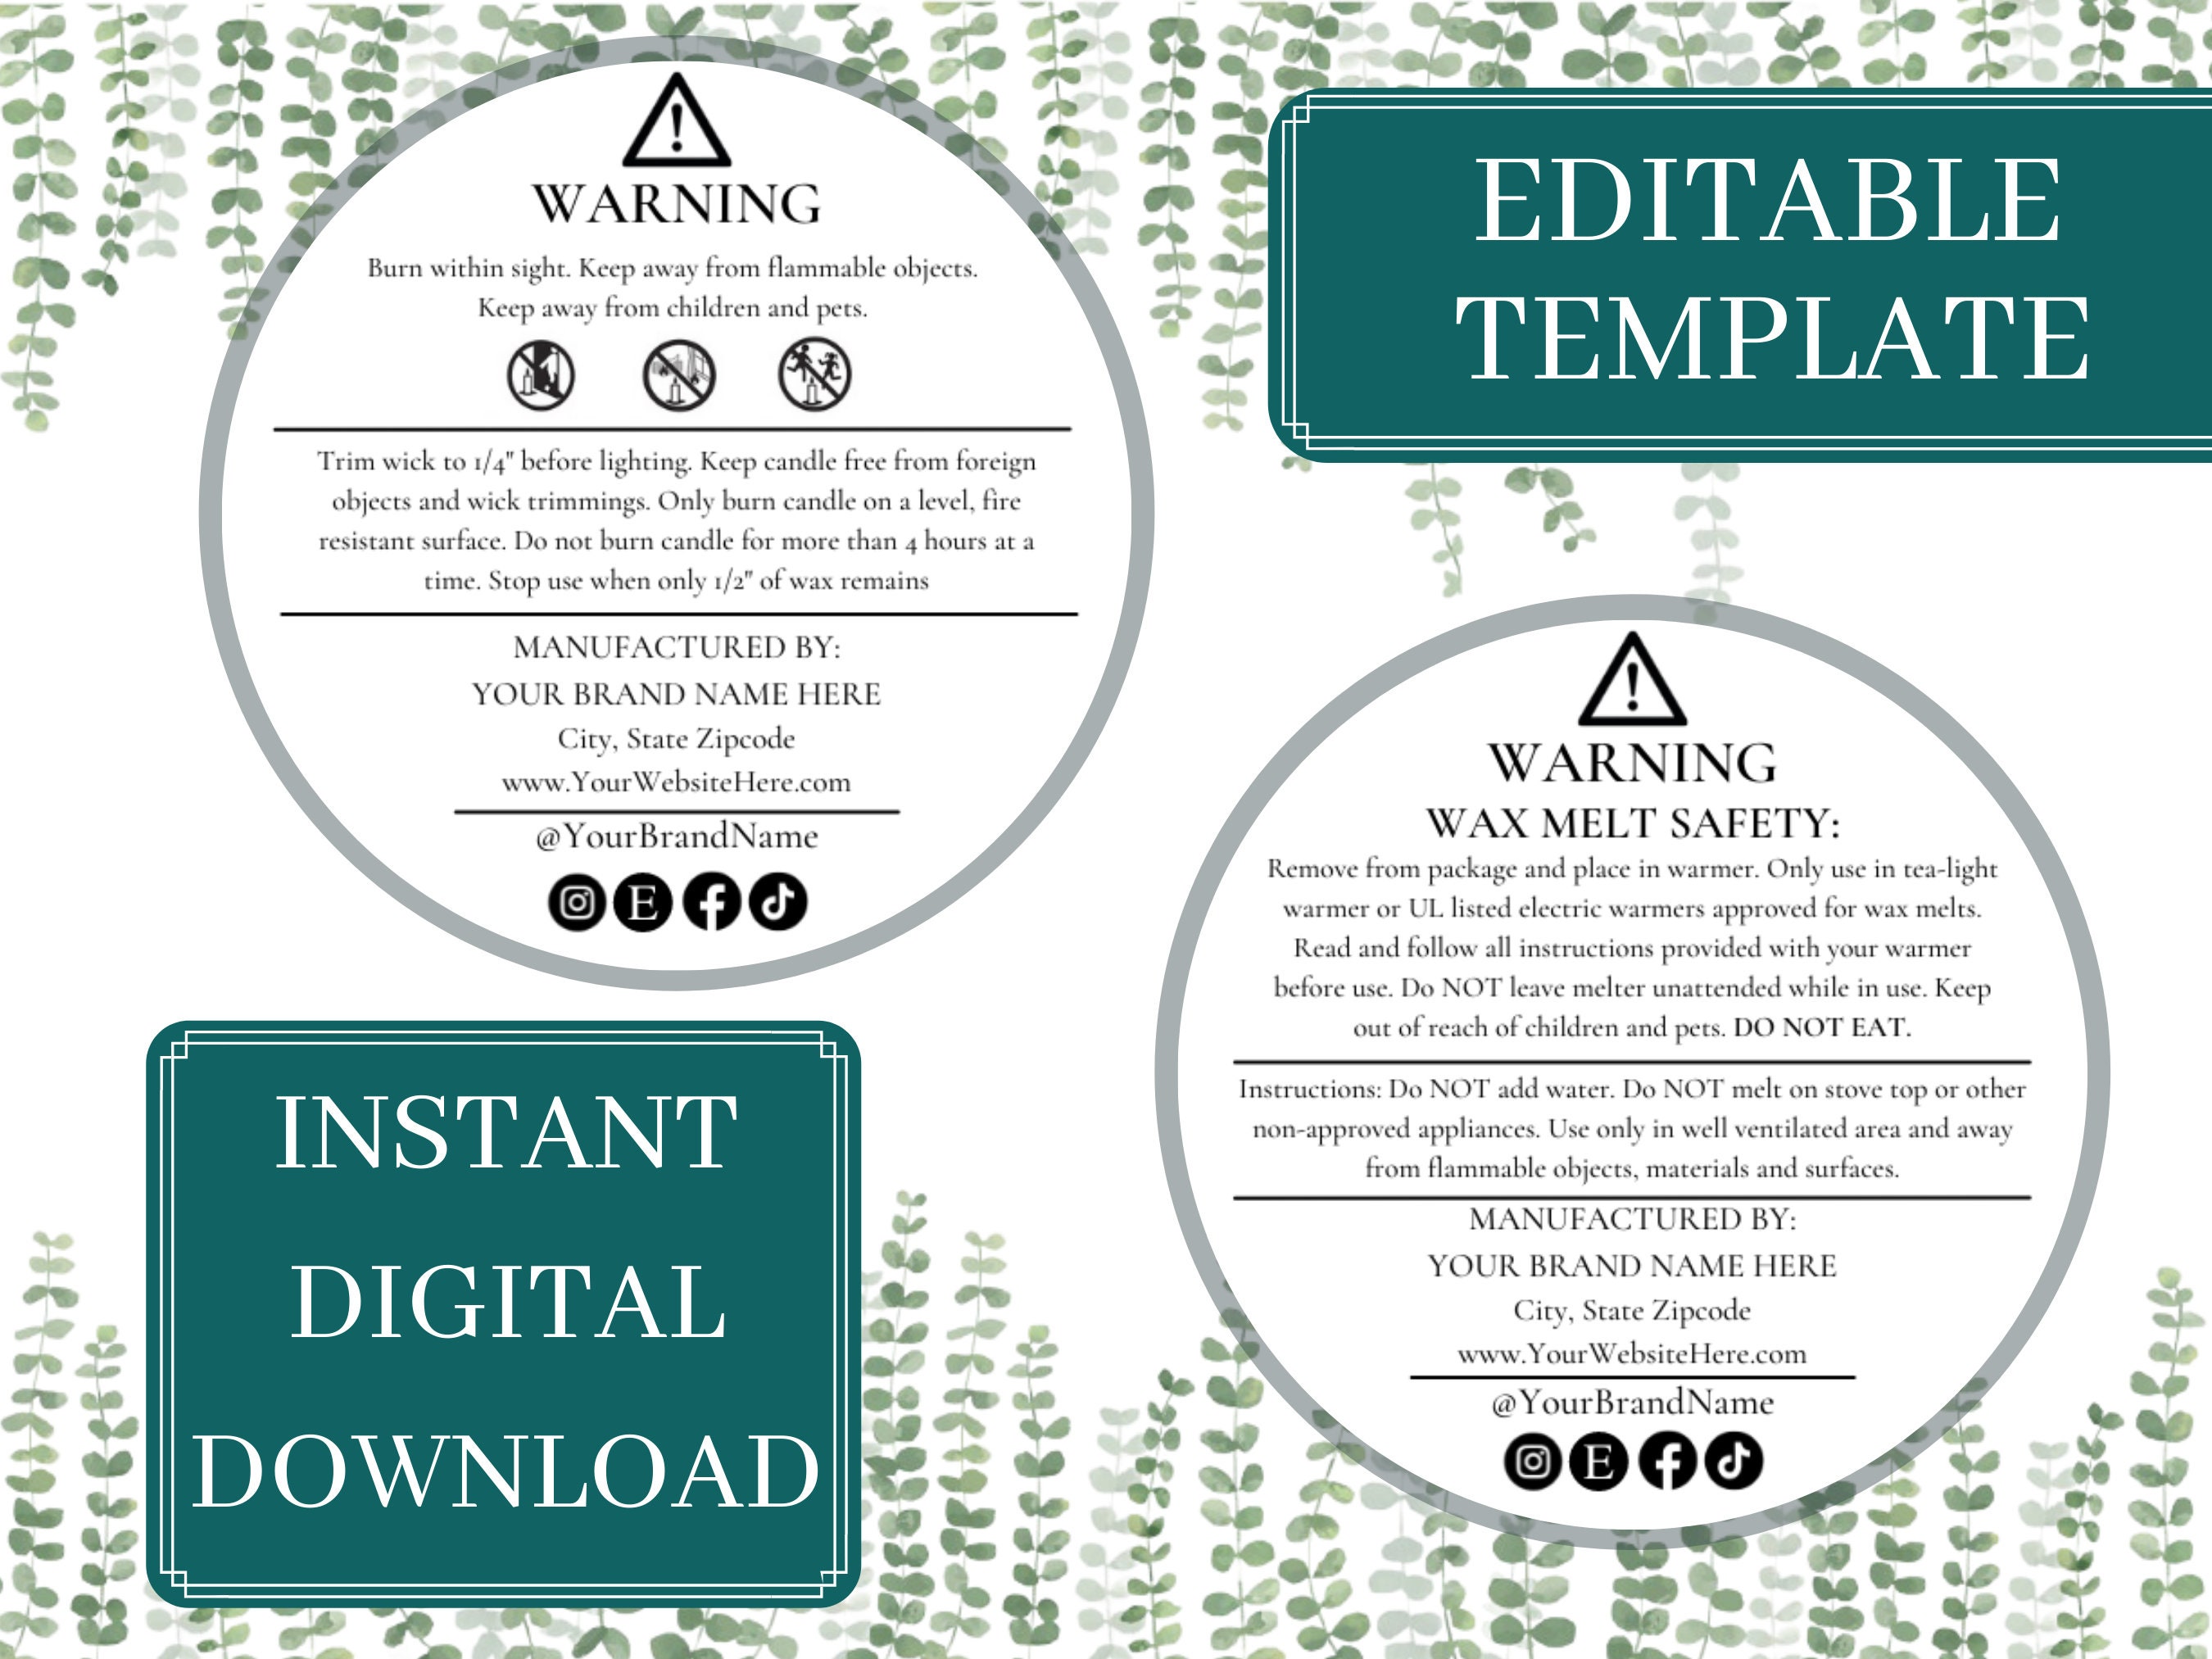 Candle & Wax Melt Warning Label Template DIGITAL DOWNLOAD Editable